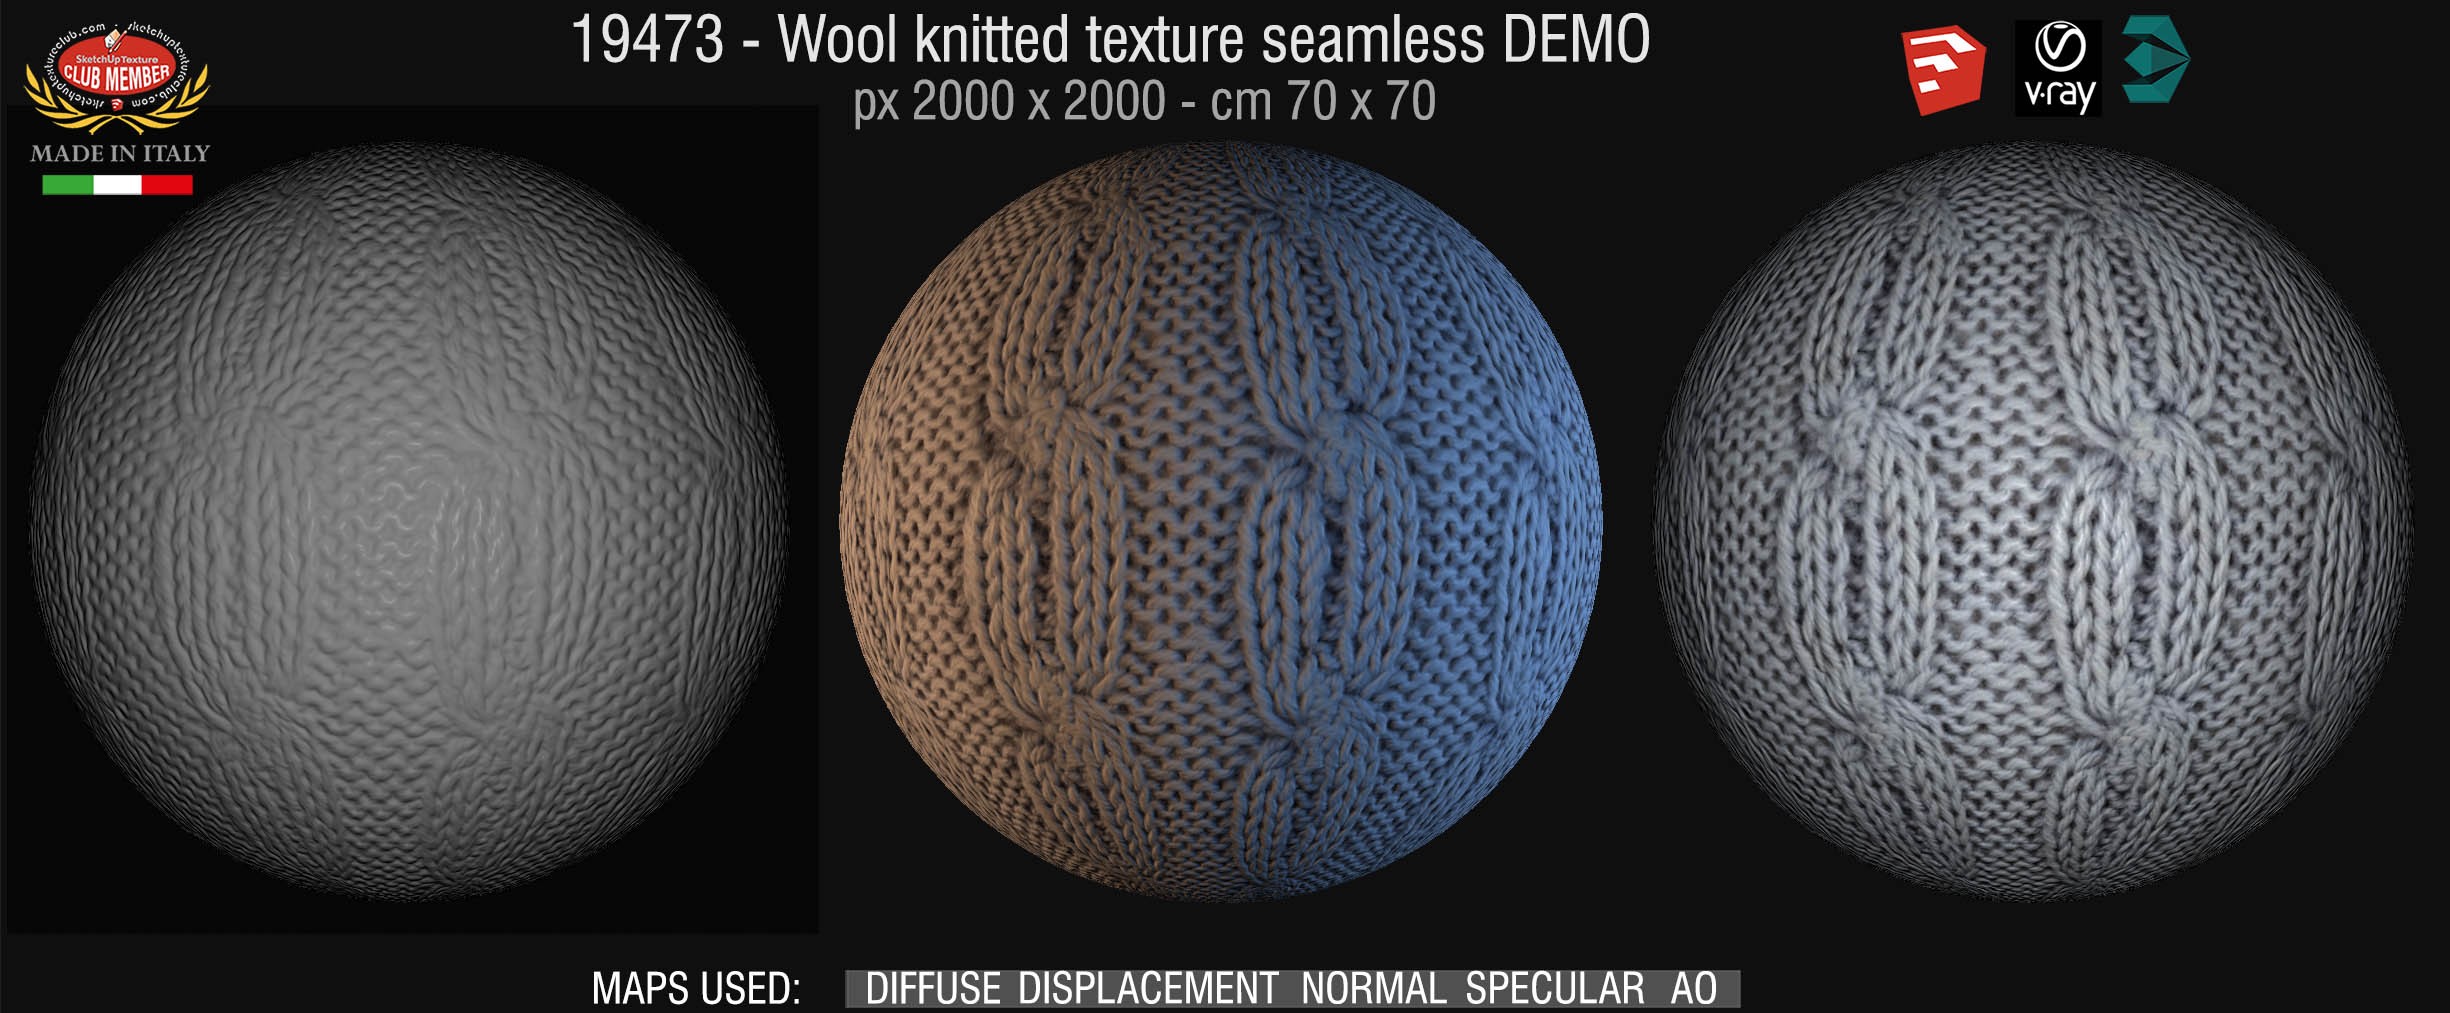 19473 Wool knitted texture seamless + maps DEMO